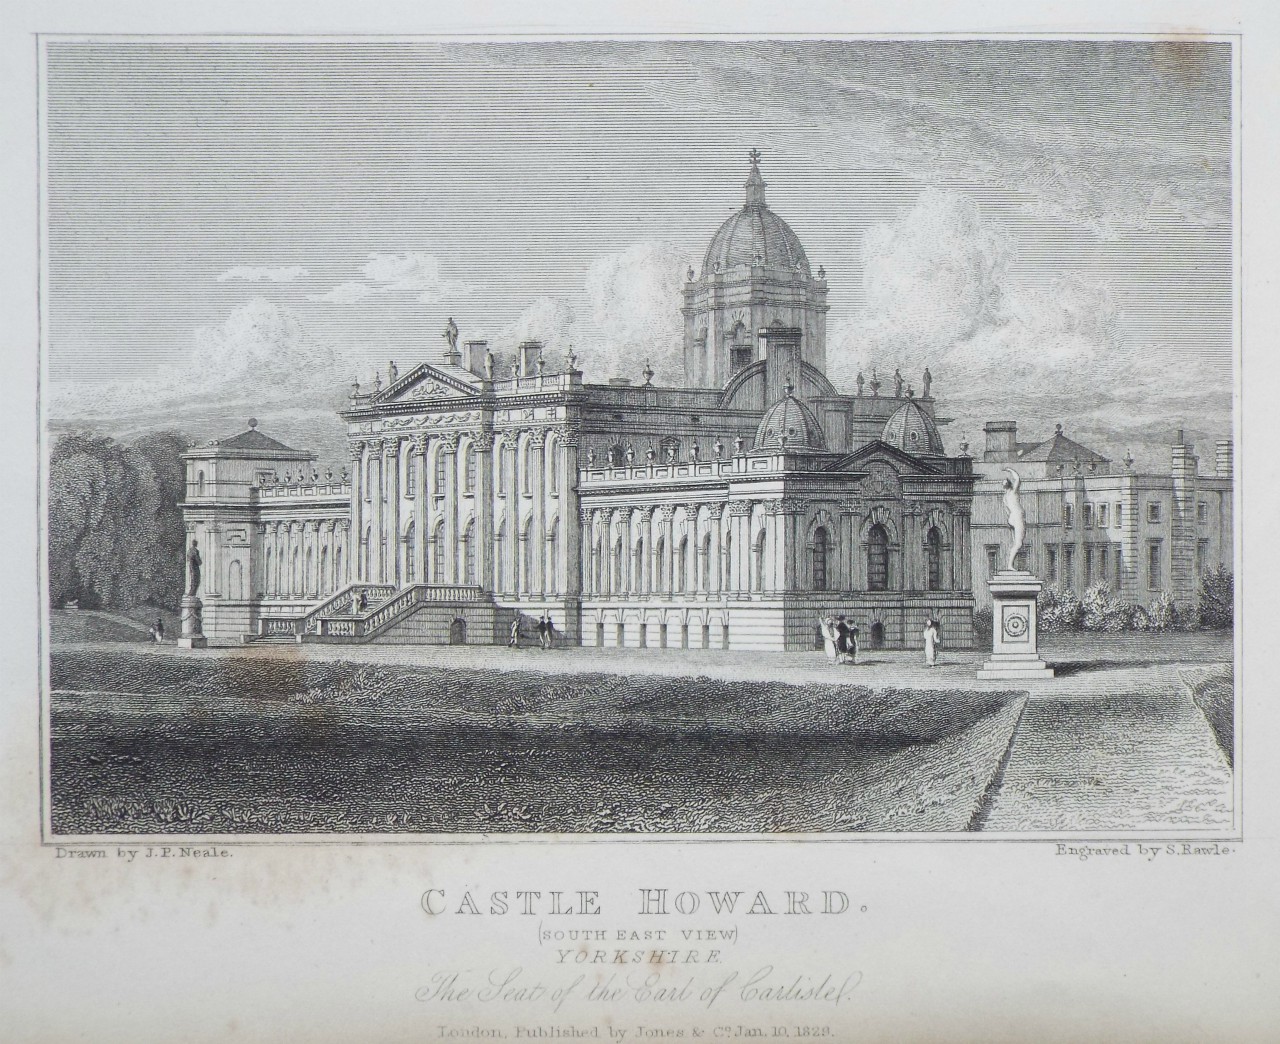 Print - Castle Howard. (South East View) Yorkshire. The Seat of the Earl of Carlisle. - Rawle